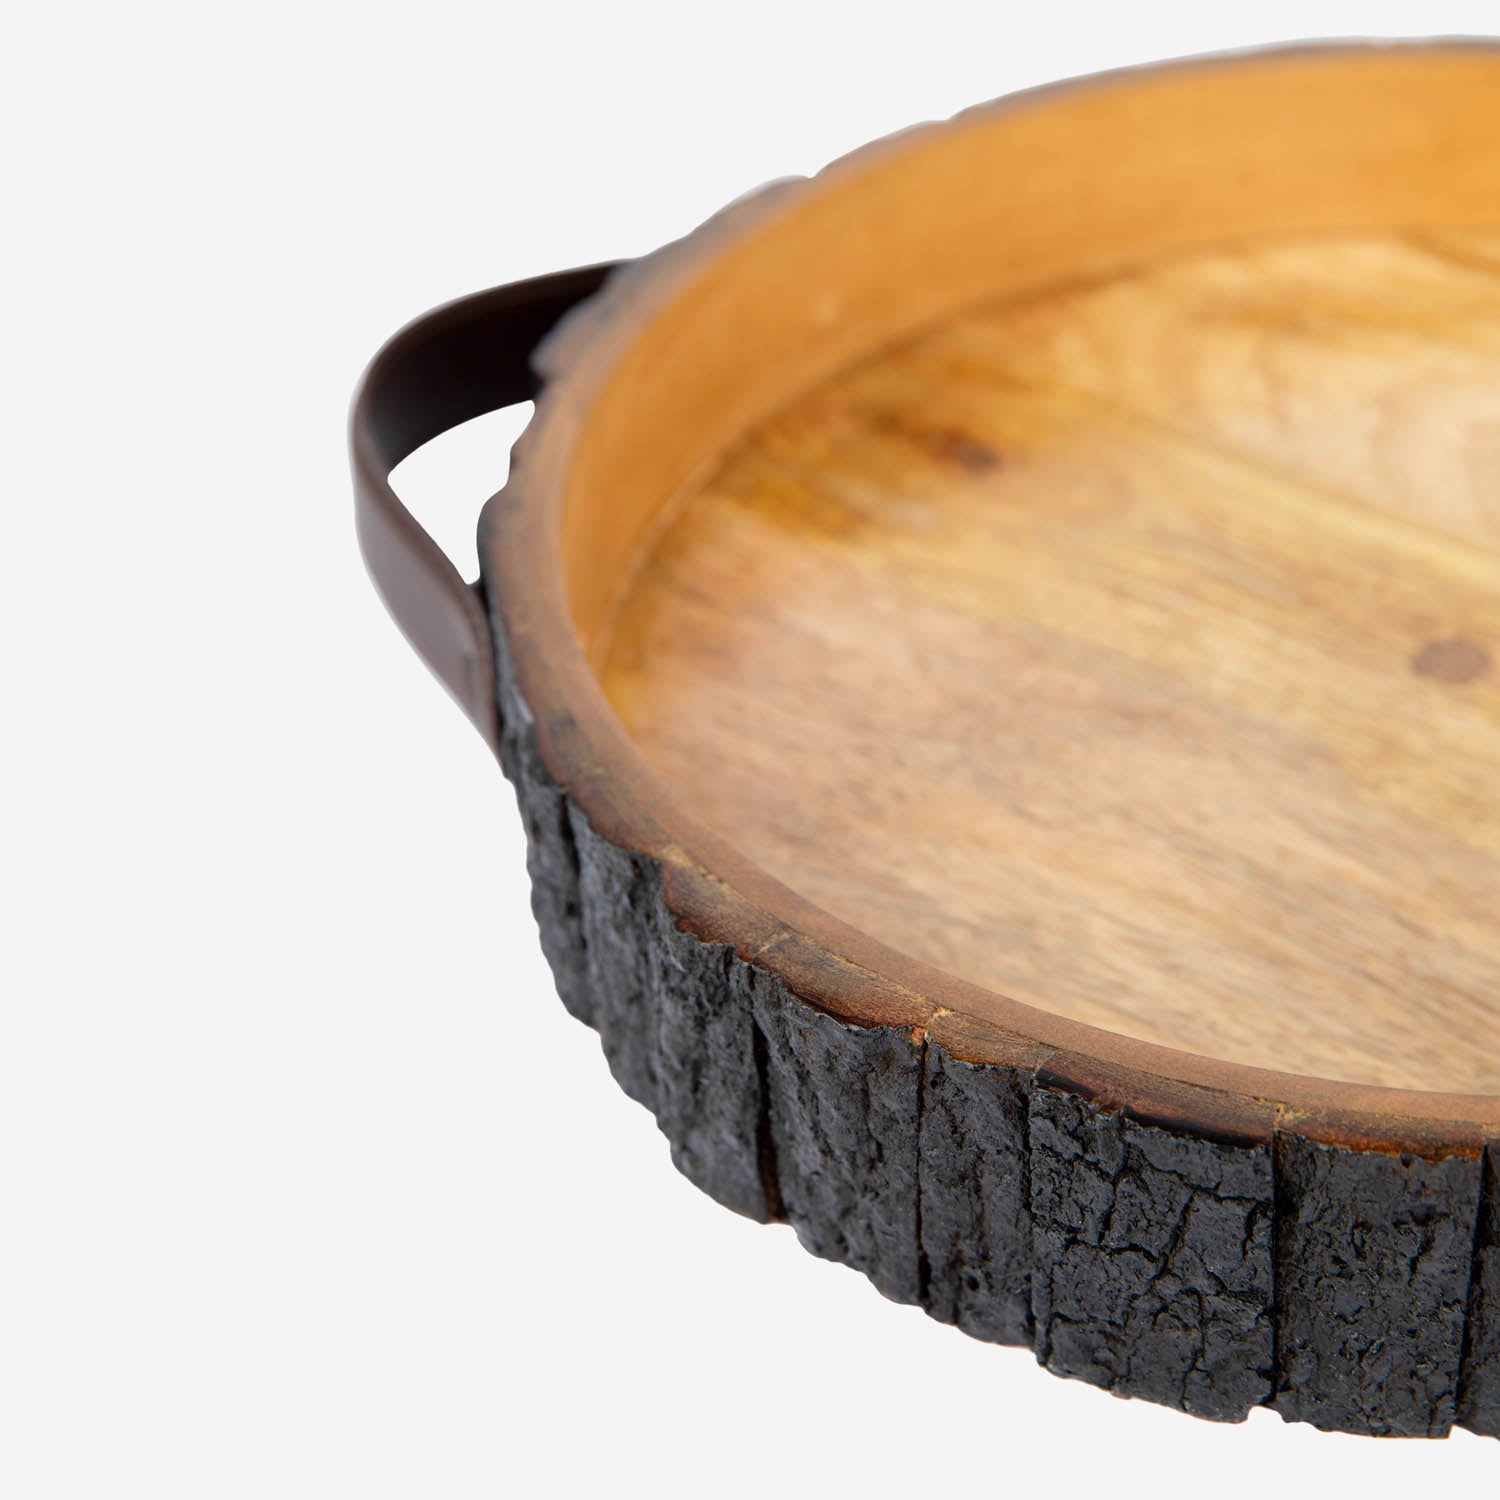 Wooden Platter with Vegan Leather Handle